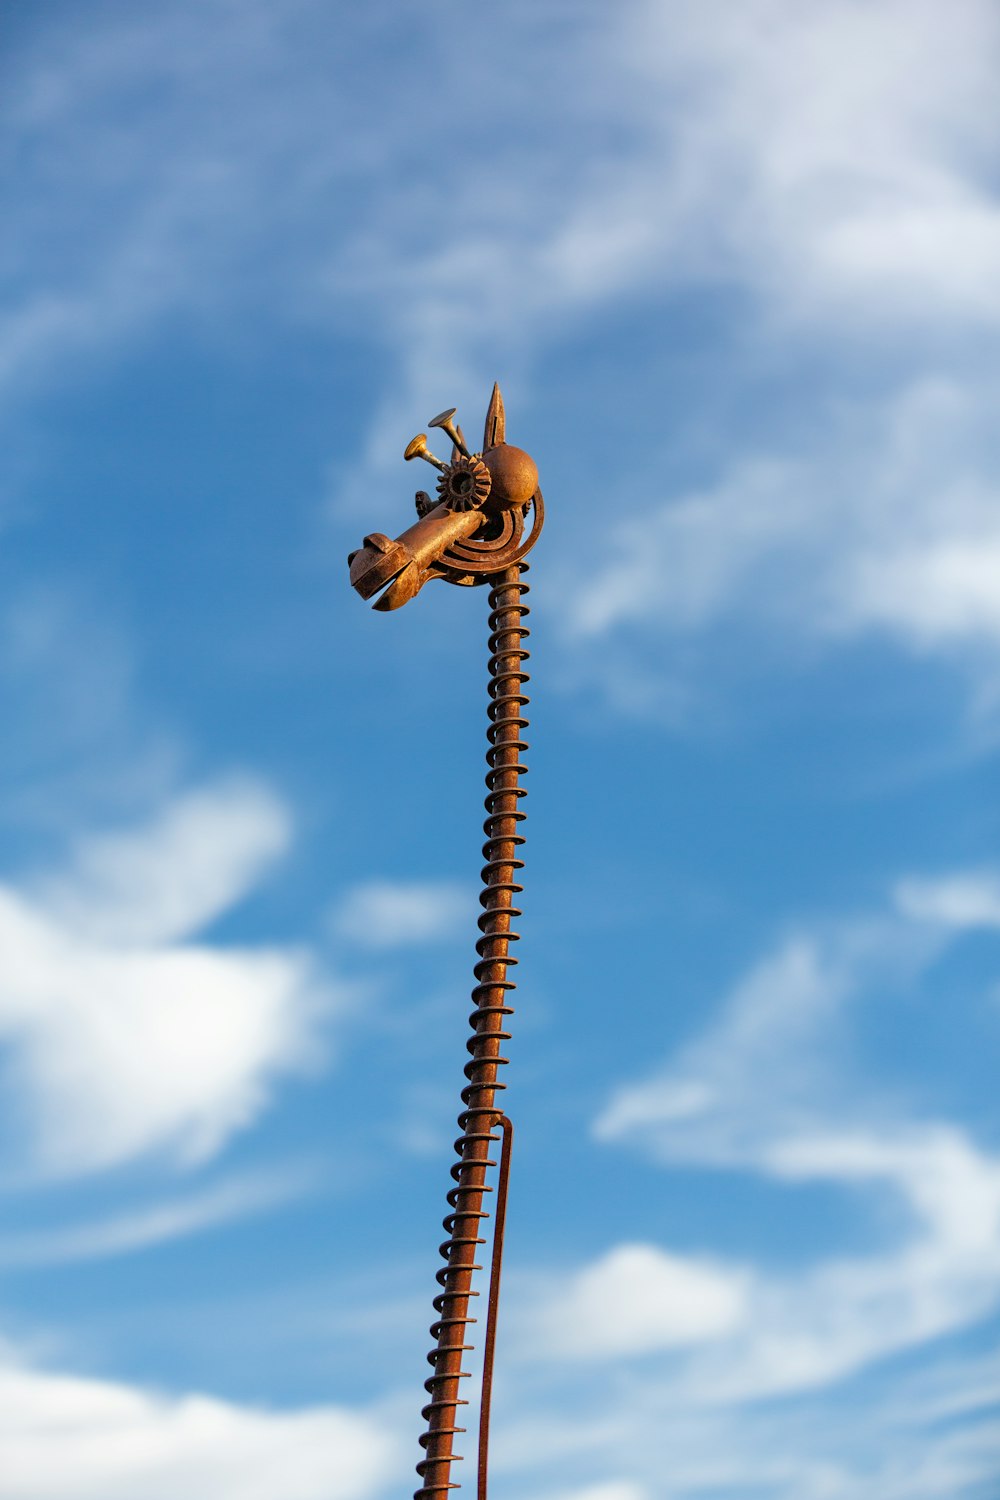 a statue of a man riding a horse on top of a tall pole